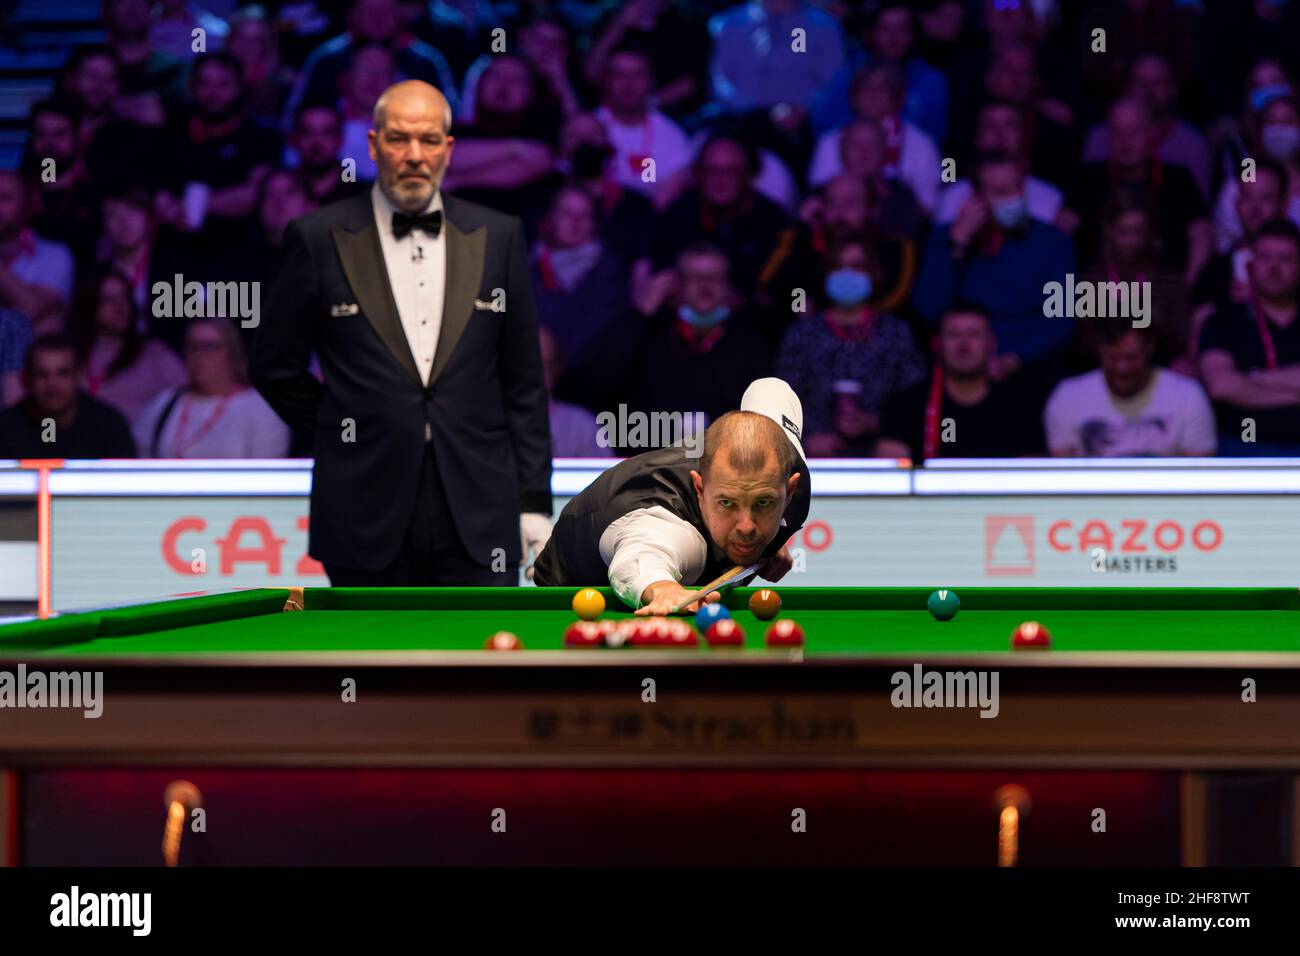 London, UK. 14th Jan, 2022. Barry Hawkins v Mark Selby during the 2022 Cazoo Master at Alexandra Palace on Friday, January 14, 2022 in LONDON ENGLAND. Credit: Taka G Wu/Alamy Live News Stock Photo